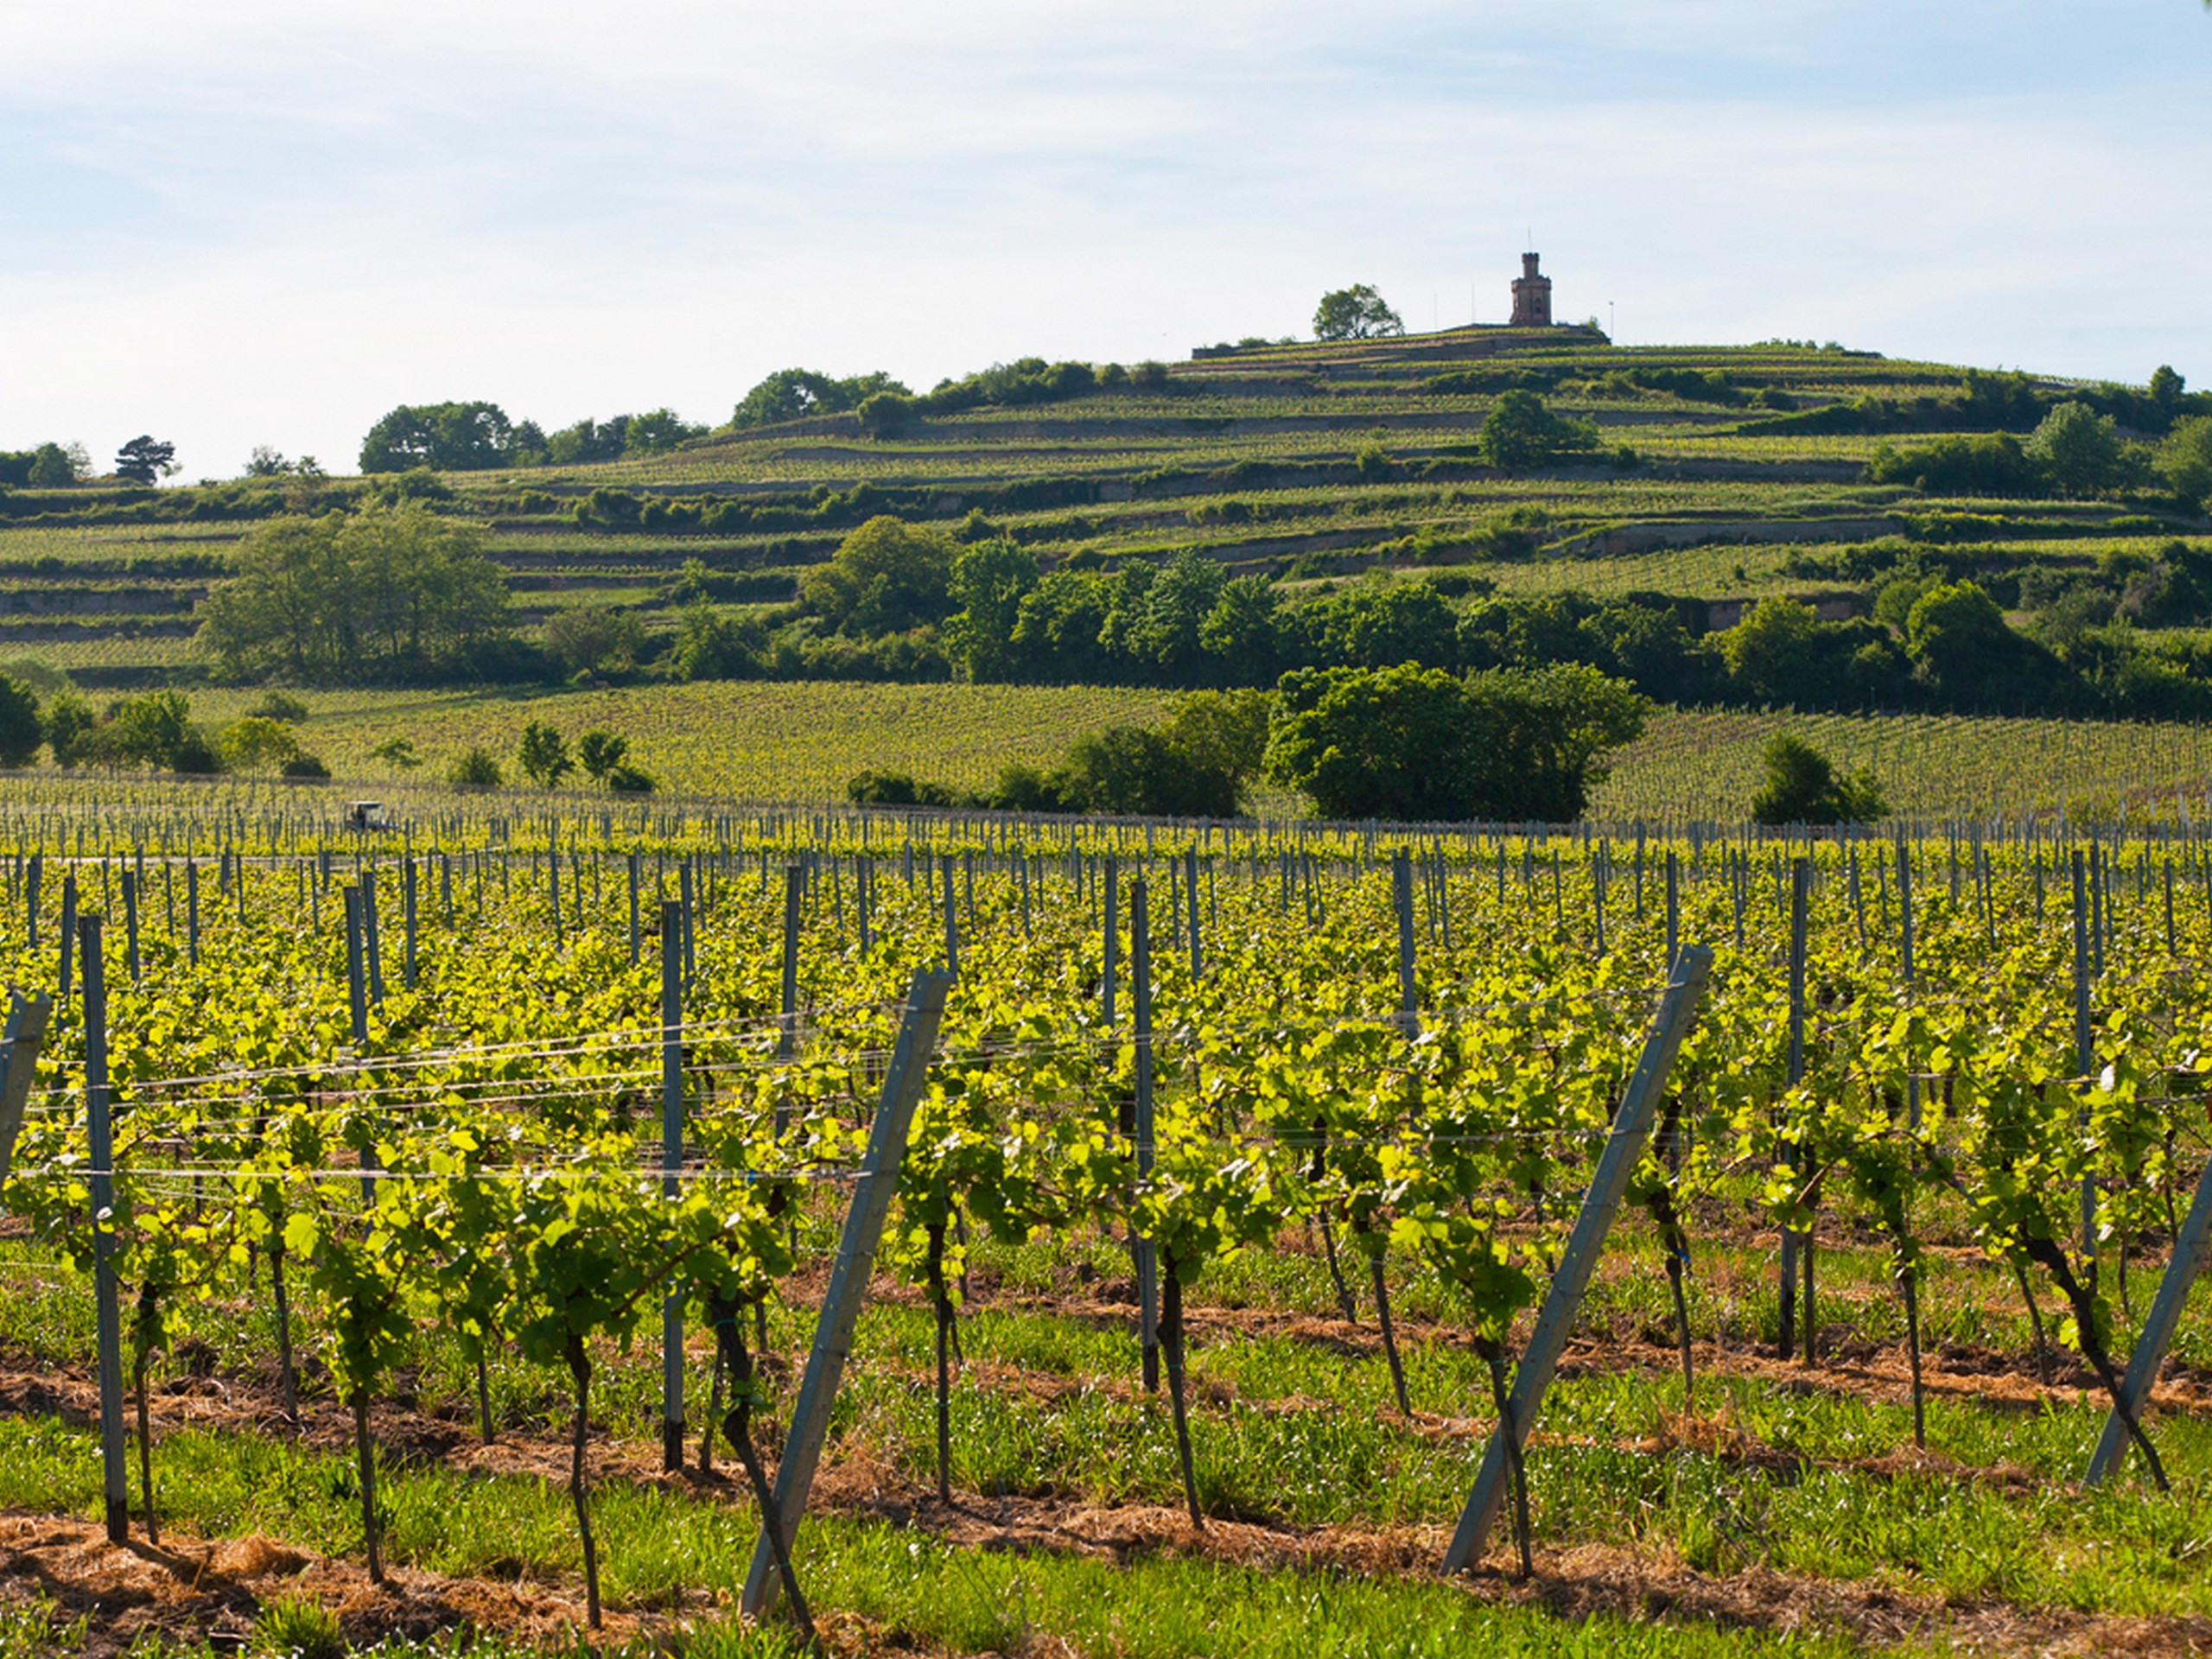 Cycling among the vineyards in Rhine, Germany